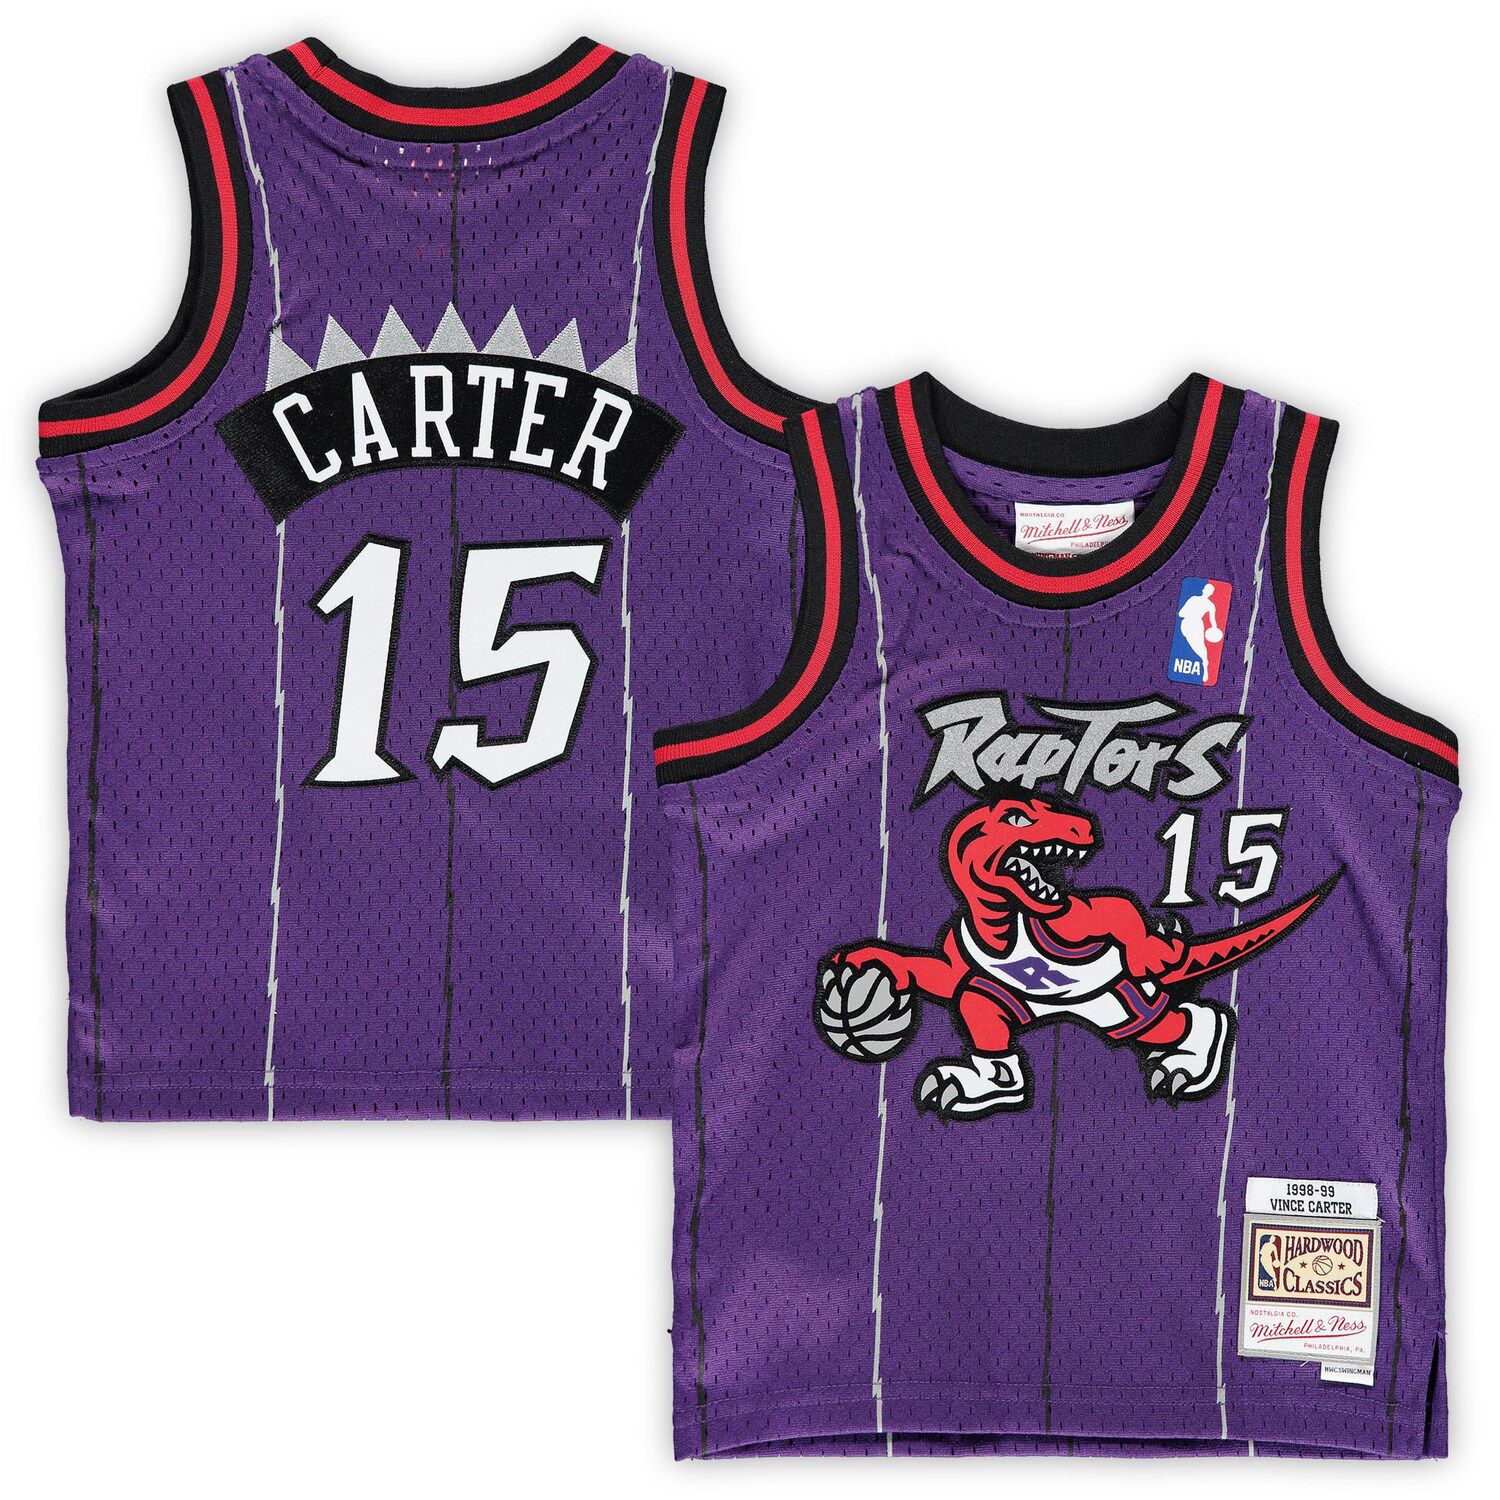 Image for Unbranded Infant Mitchell & Ness Vince Carter Purple Toronto Raptors 1998/99 Hardwood Classics Retired Player Jersey at Kohl's.